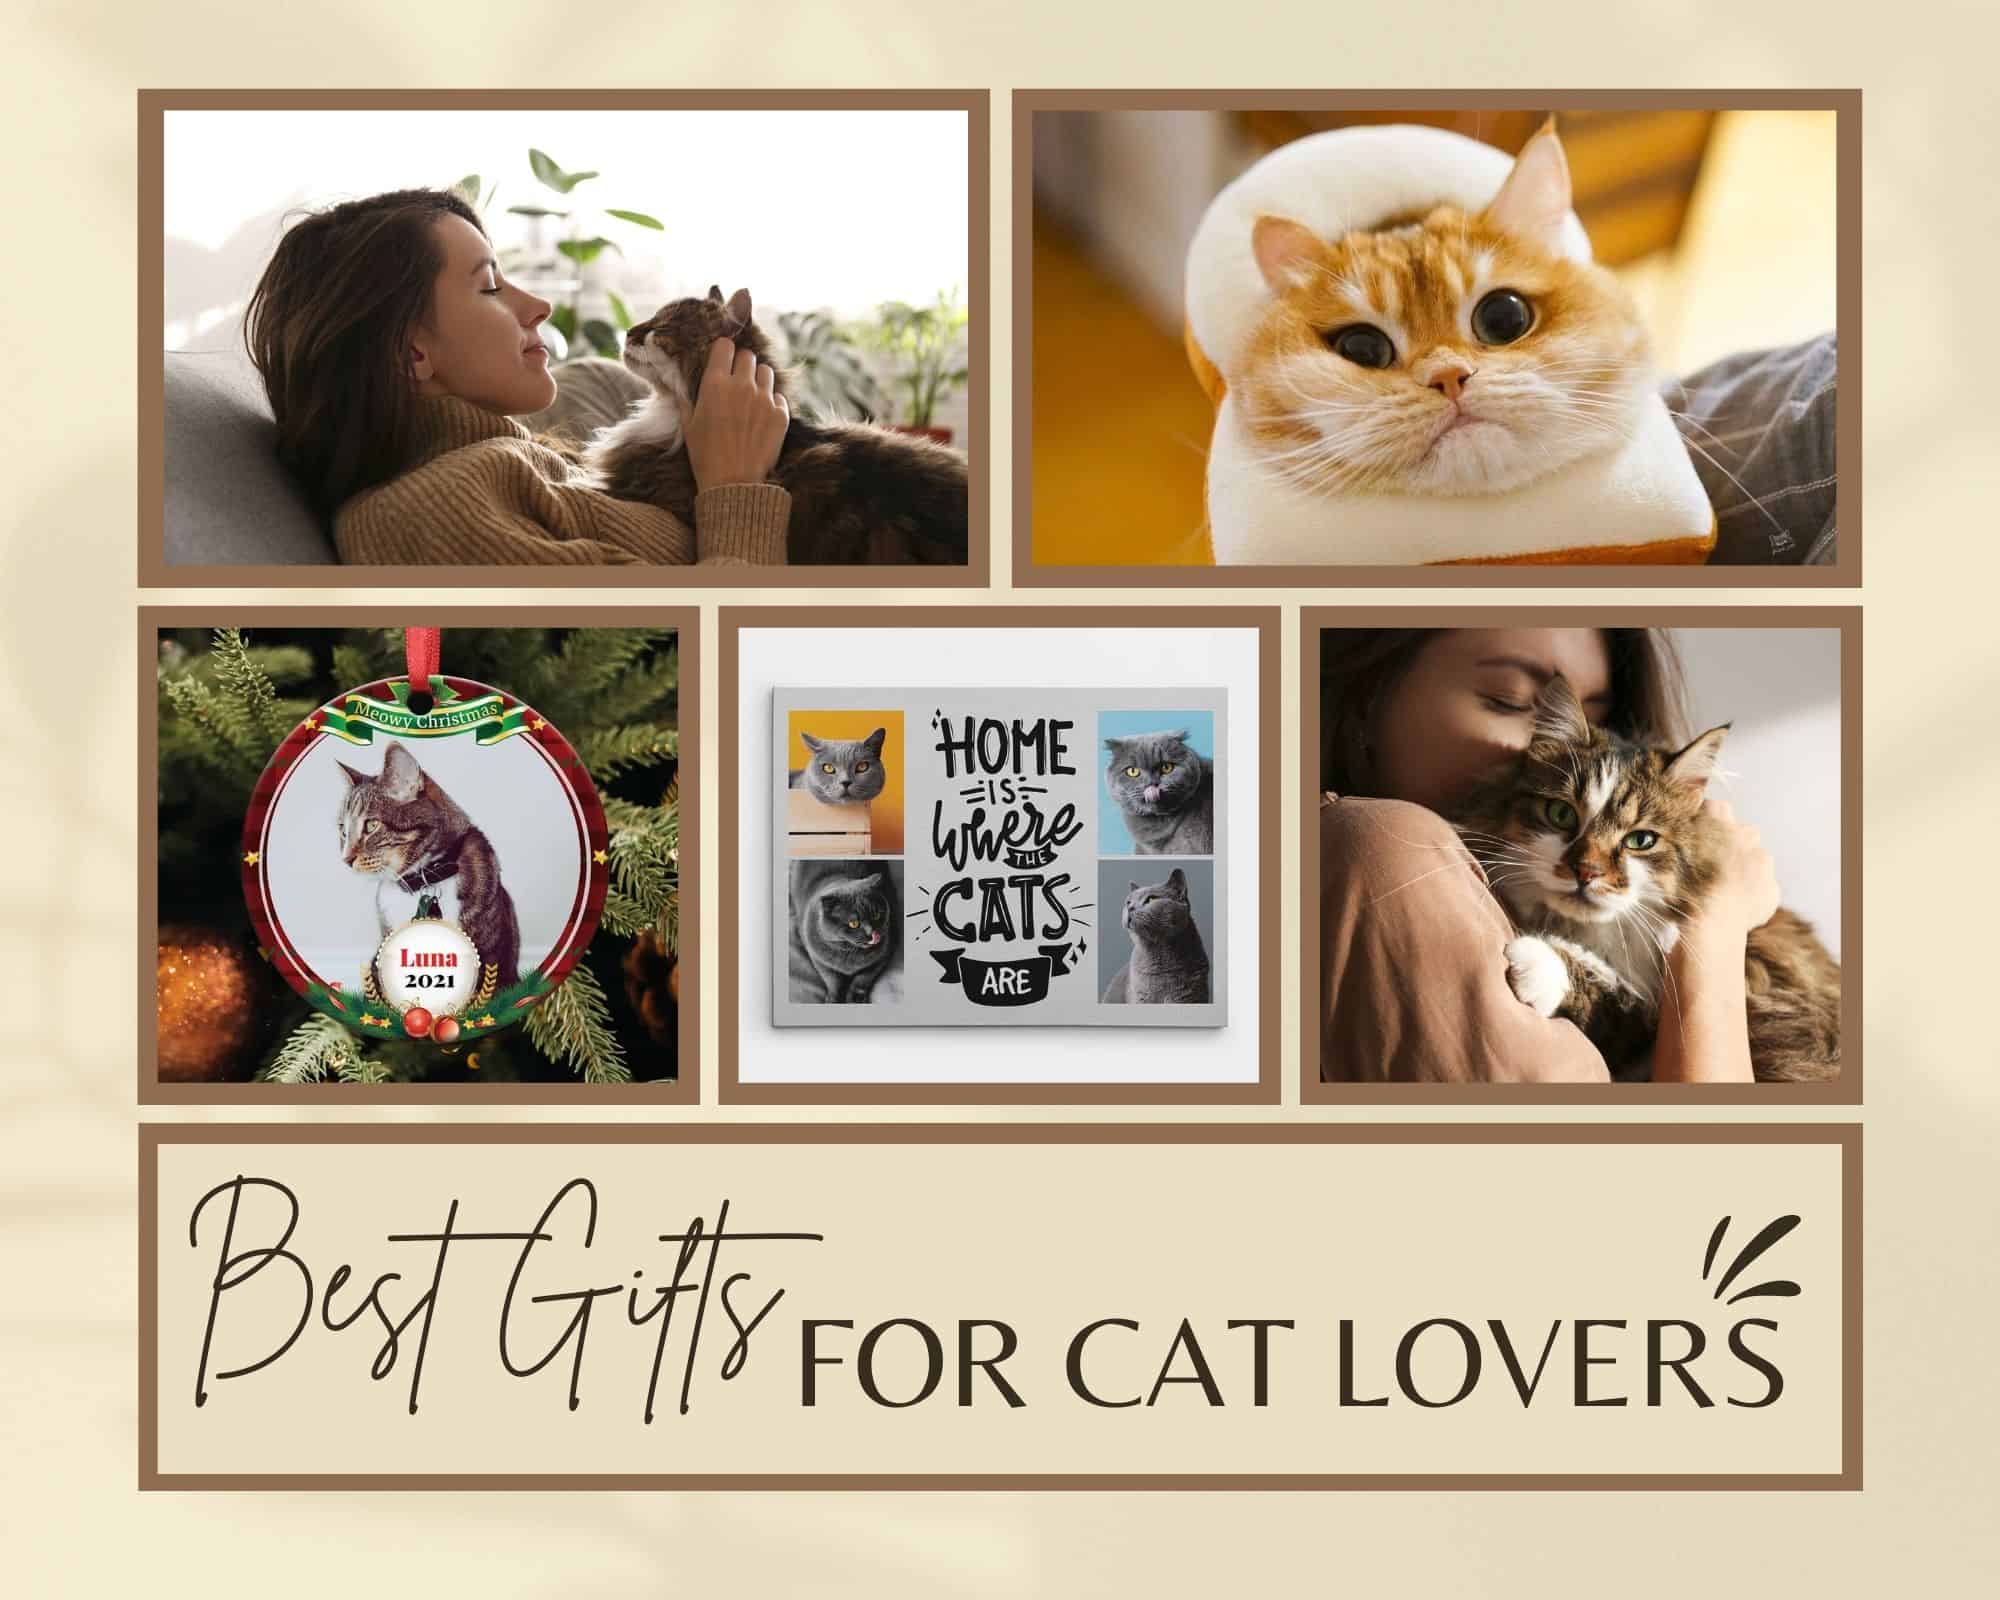 50 Best Gifts for Cat Lovers in 2022: Cat-Themed Gifts for Cat Owners